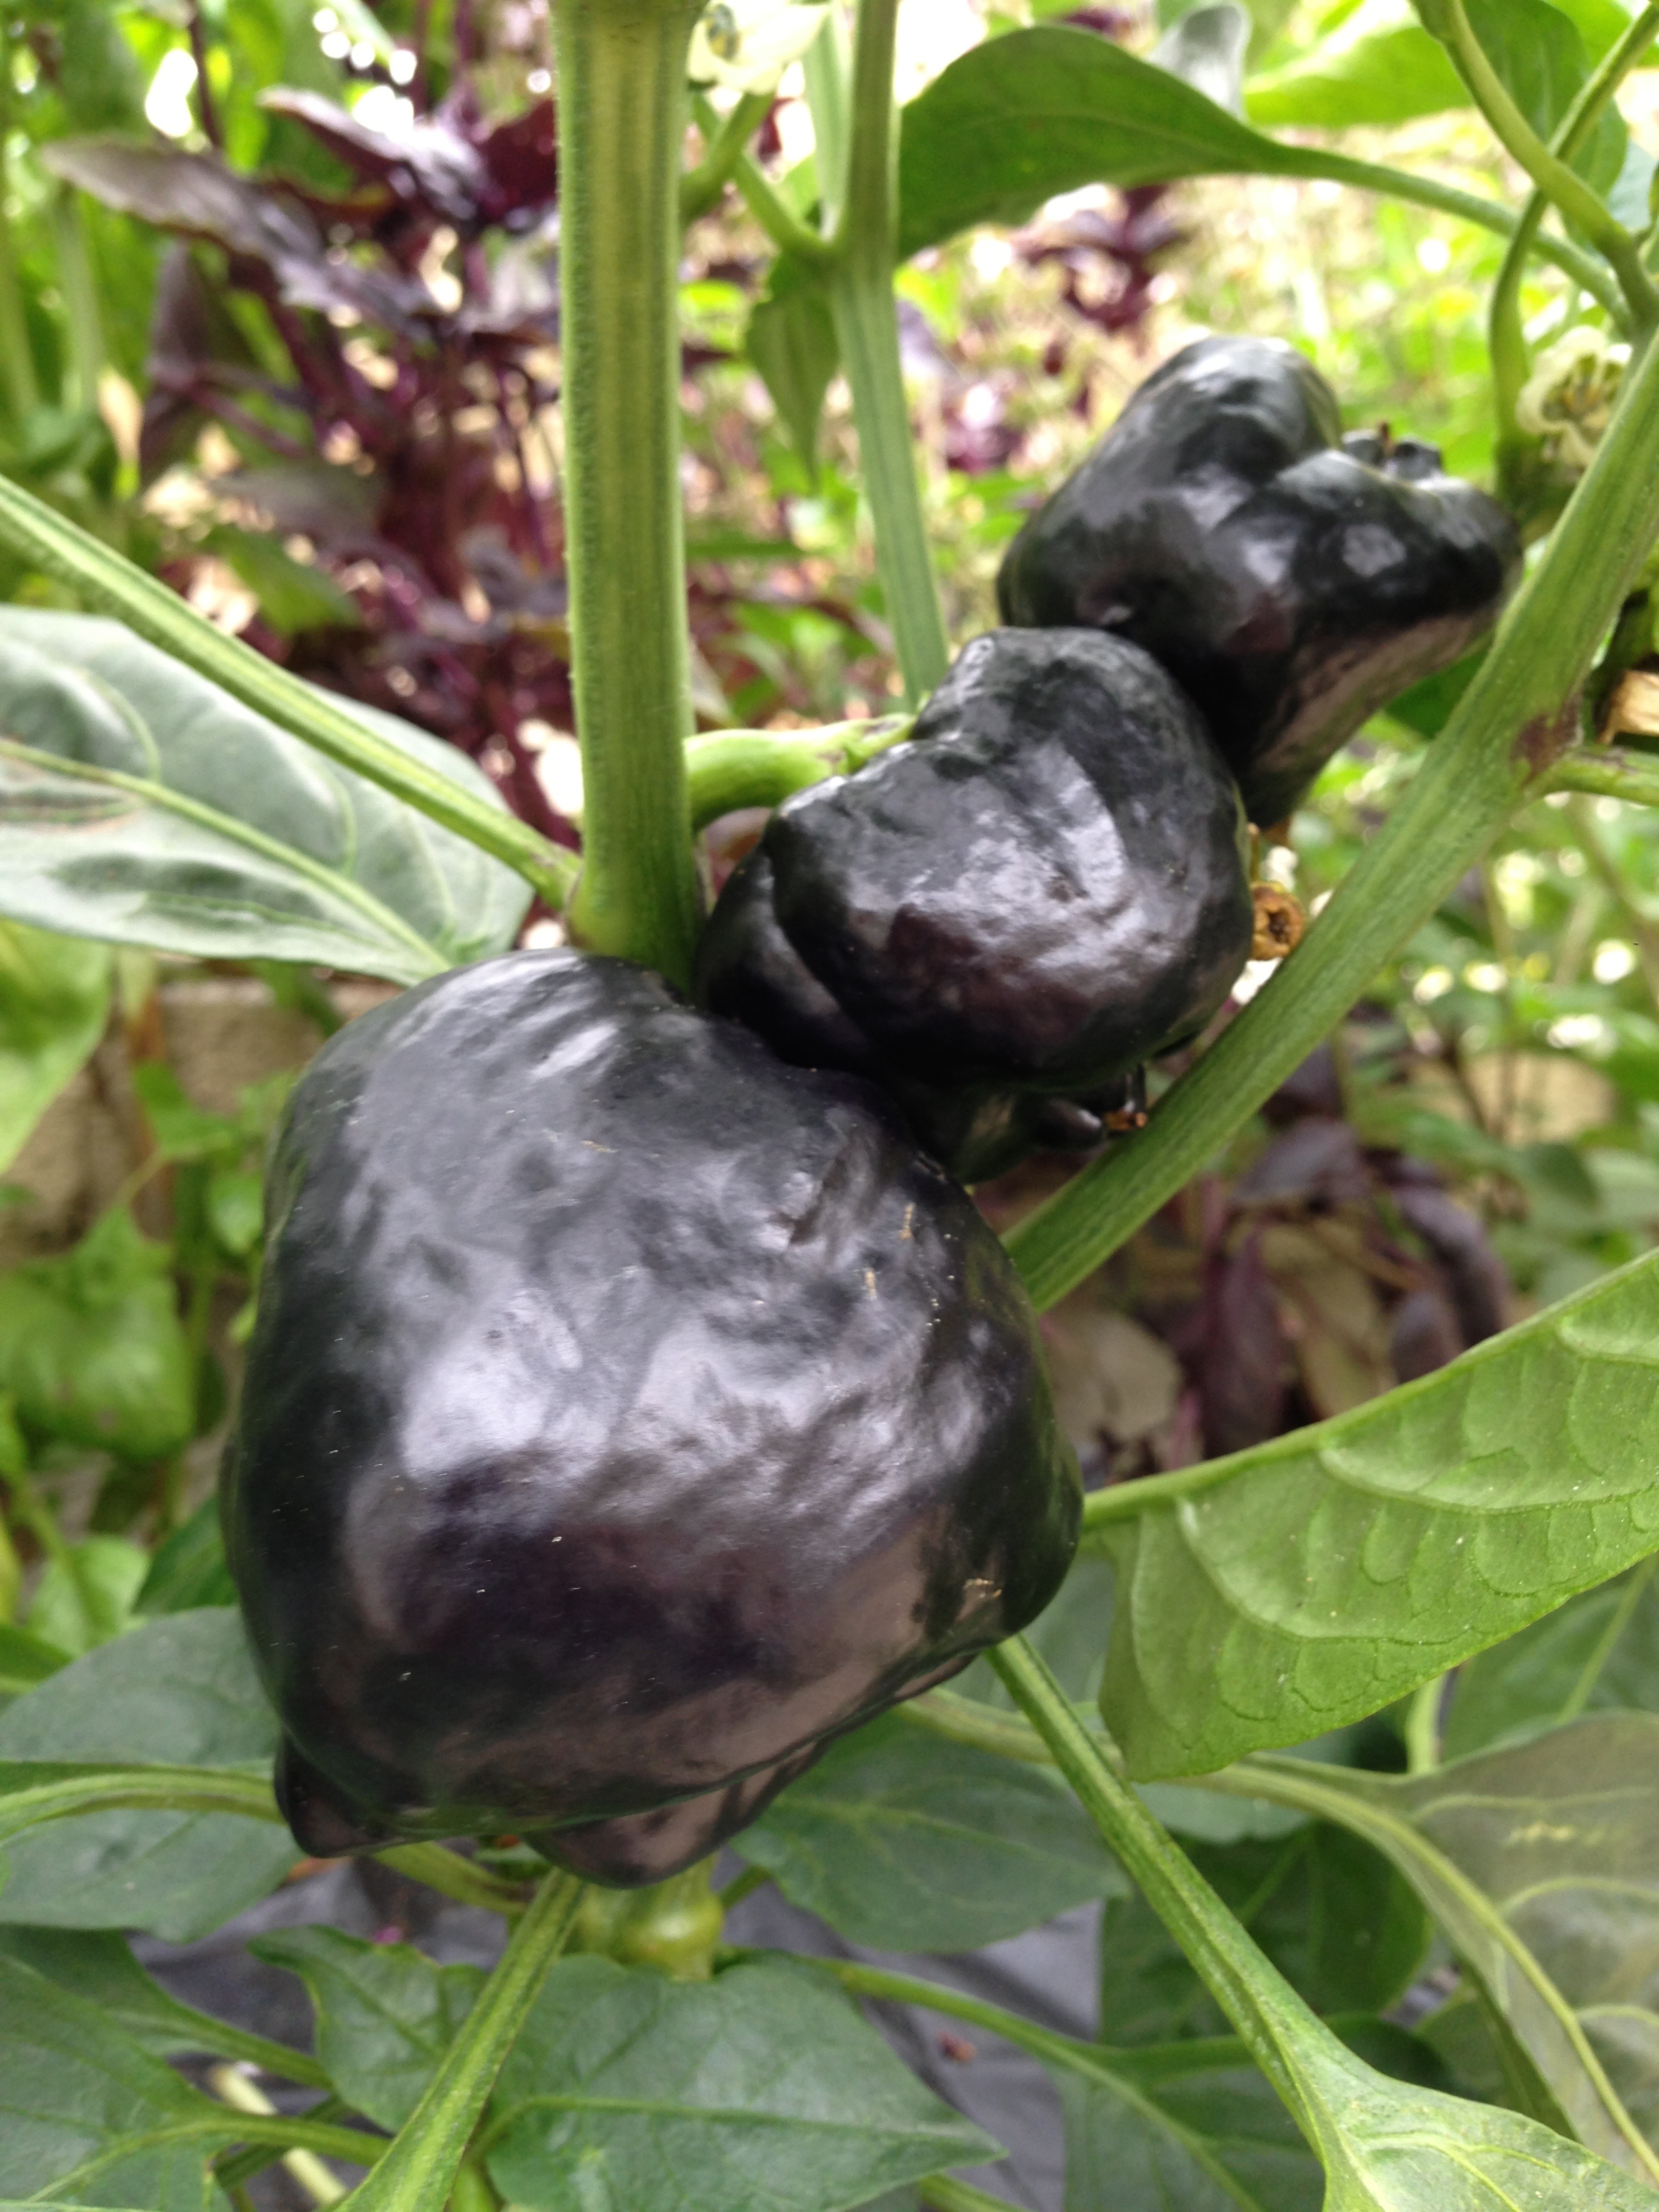 Peppers turning black